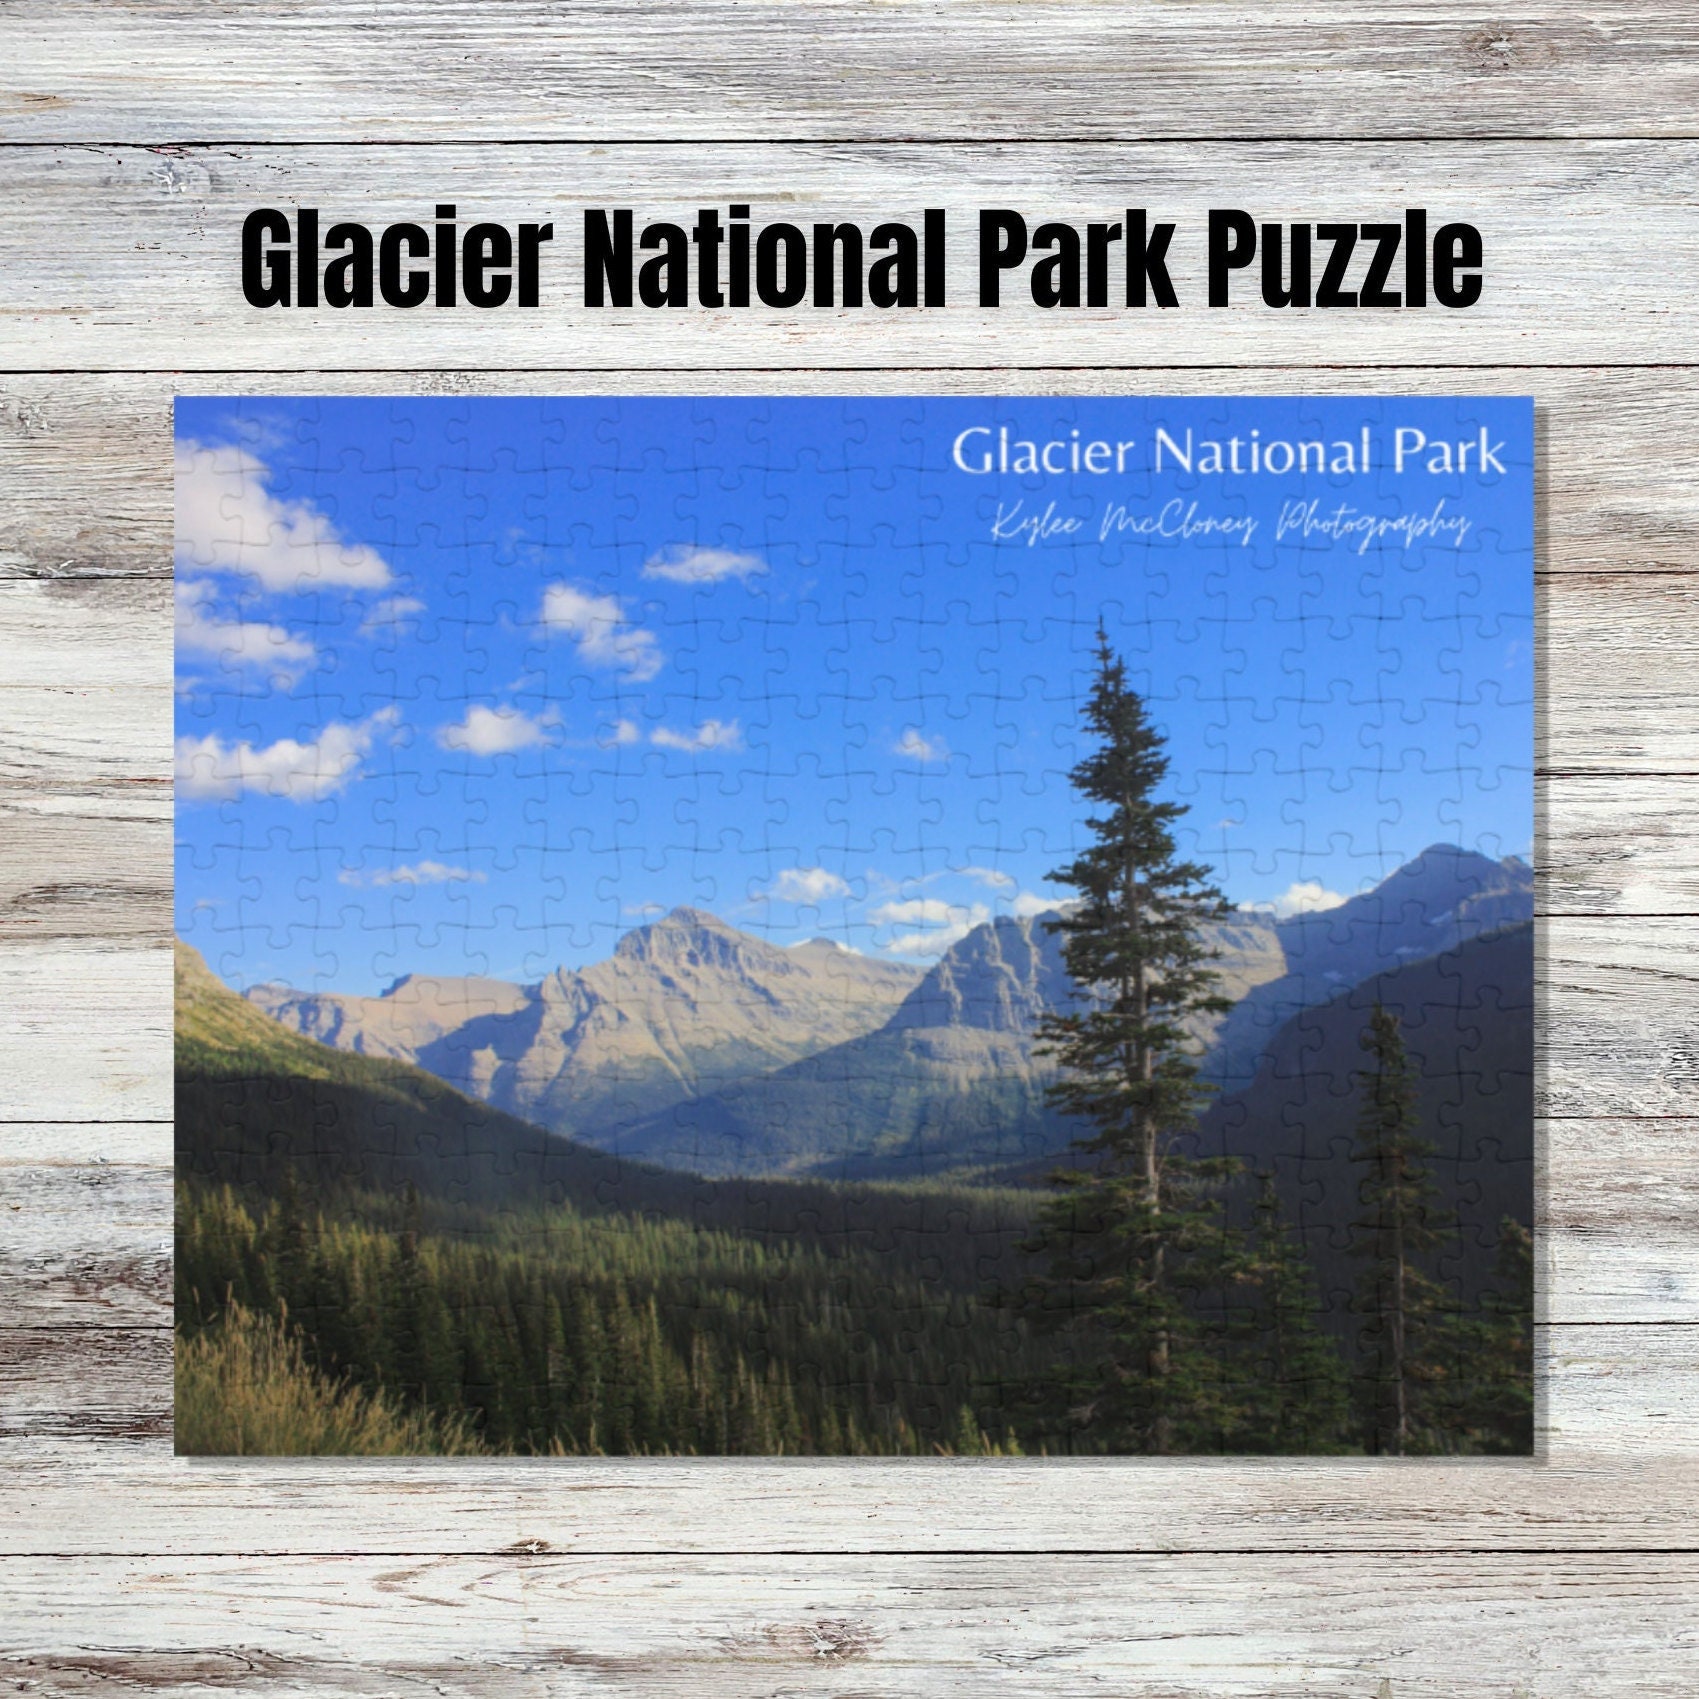 Puzzle Gerald Newton - National Parks of the USA Sunsout-62440 1000 pieces  Jigsaw Puzzles - World Maps and Mappemonde - Jigsaw Puzzle